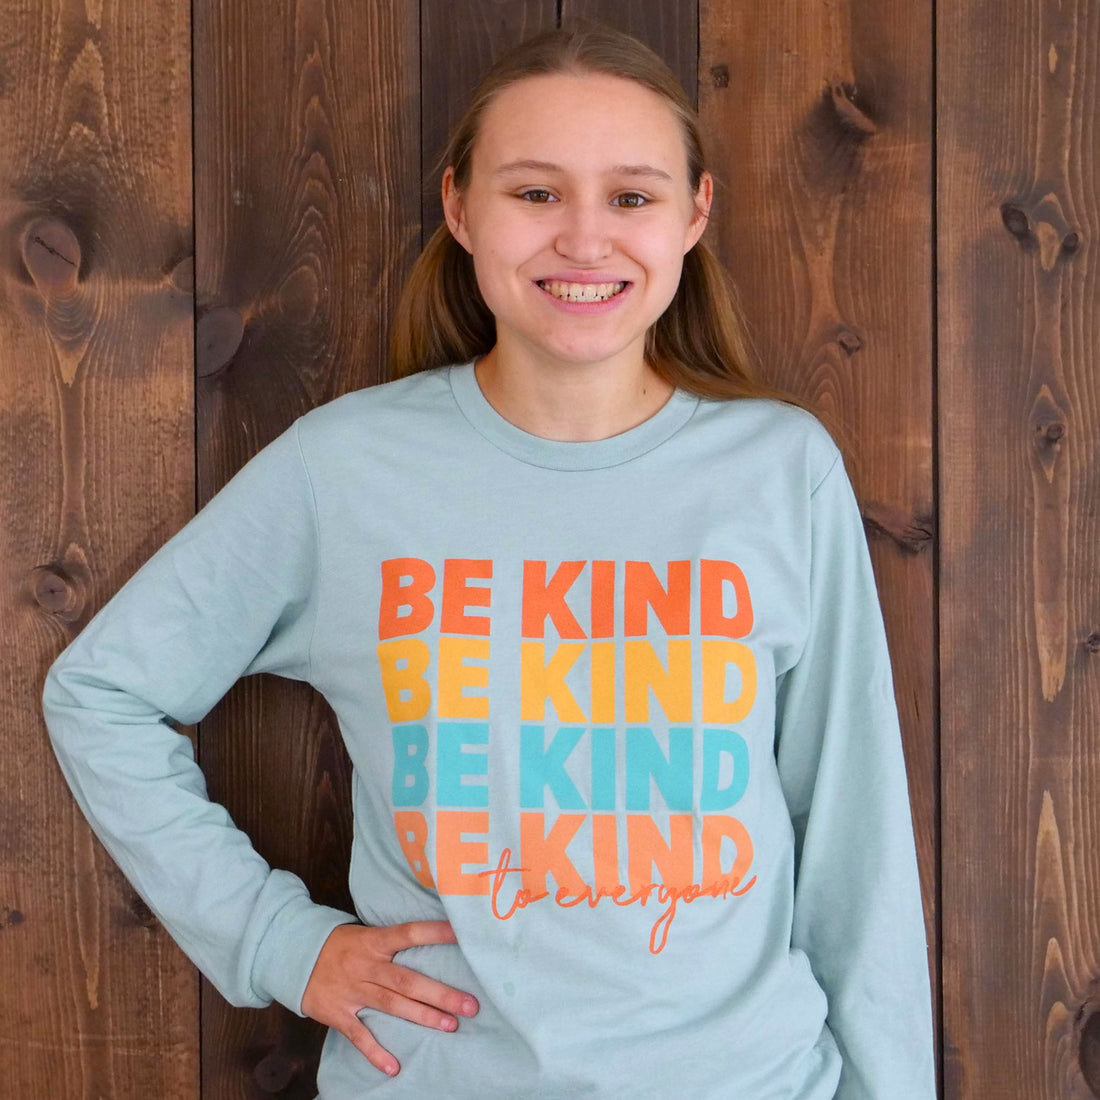 Jordyn wearing a small in our Repeating Kindness Be Kind to Everyone® long-sleeved t-shirt.